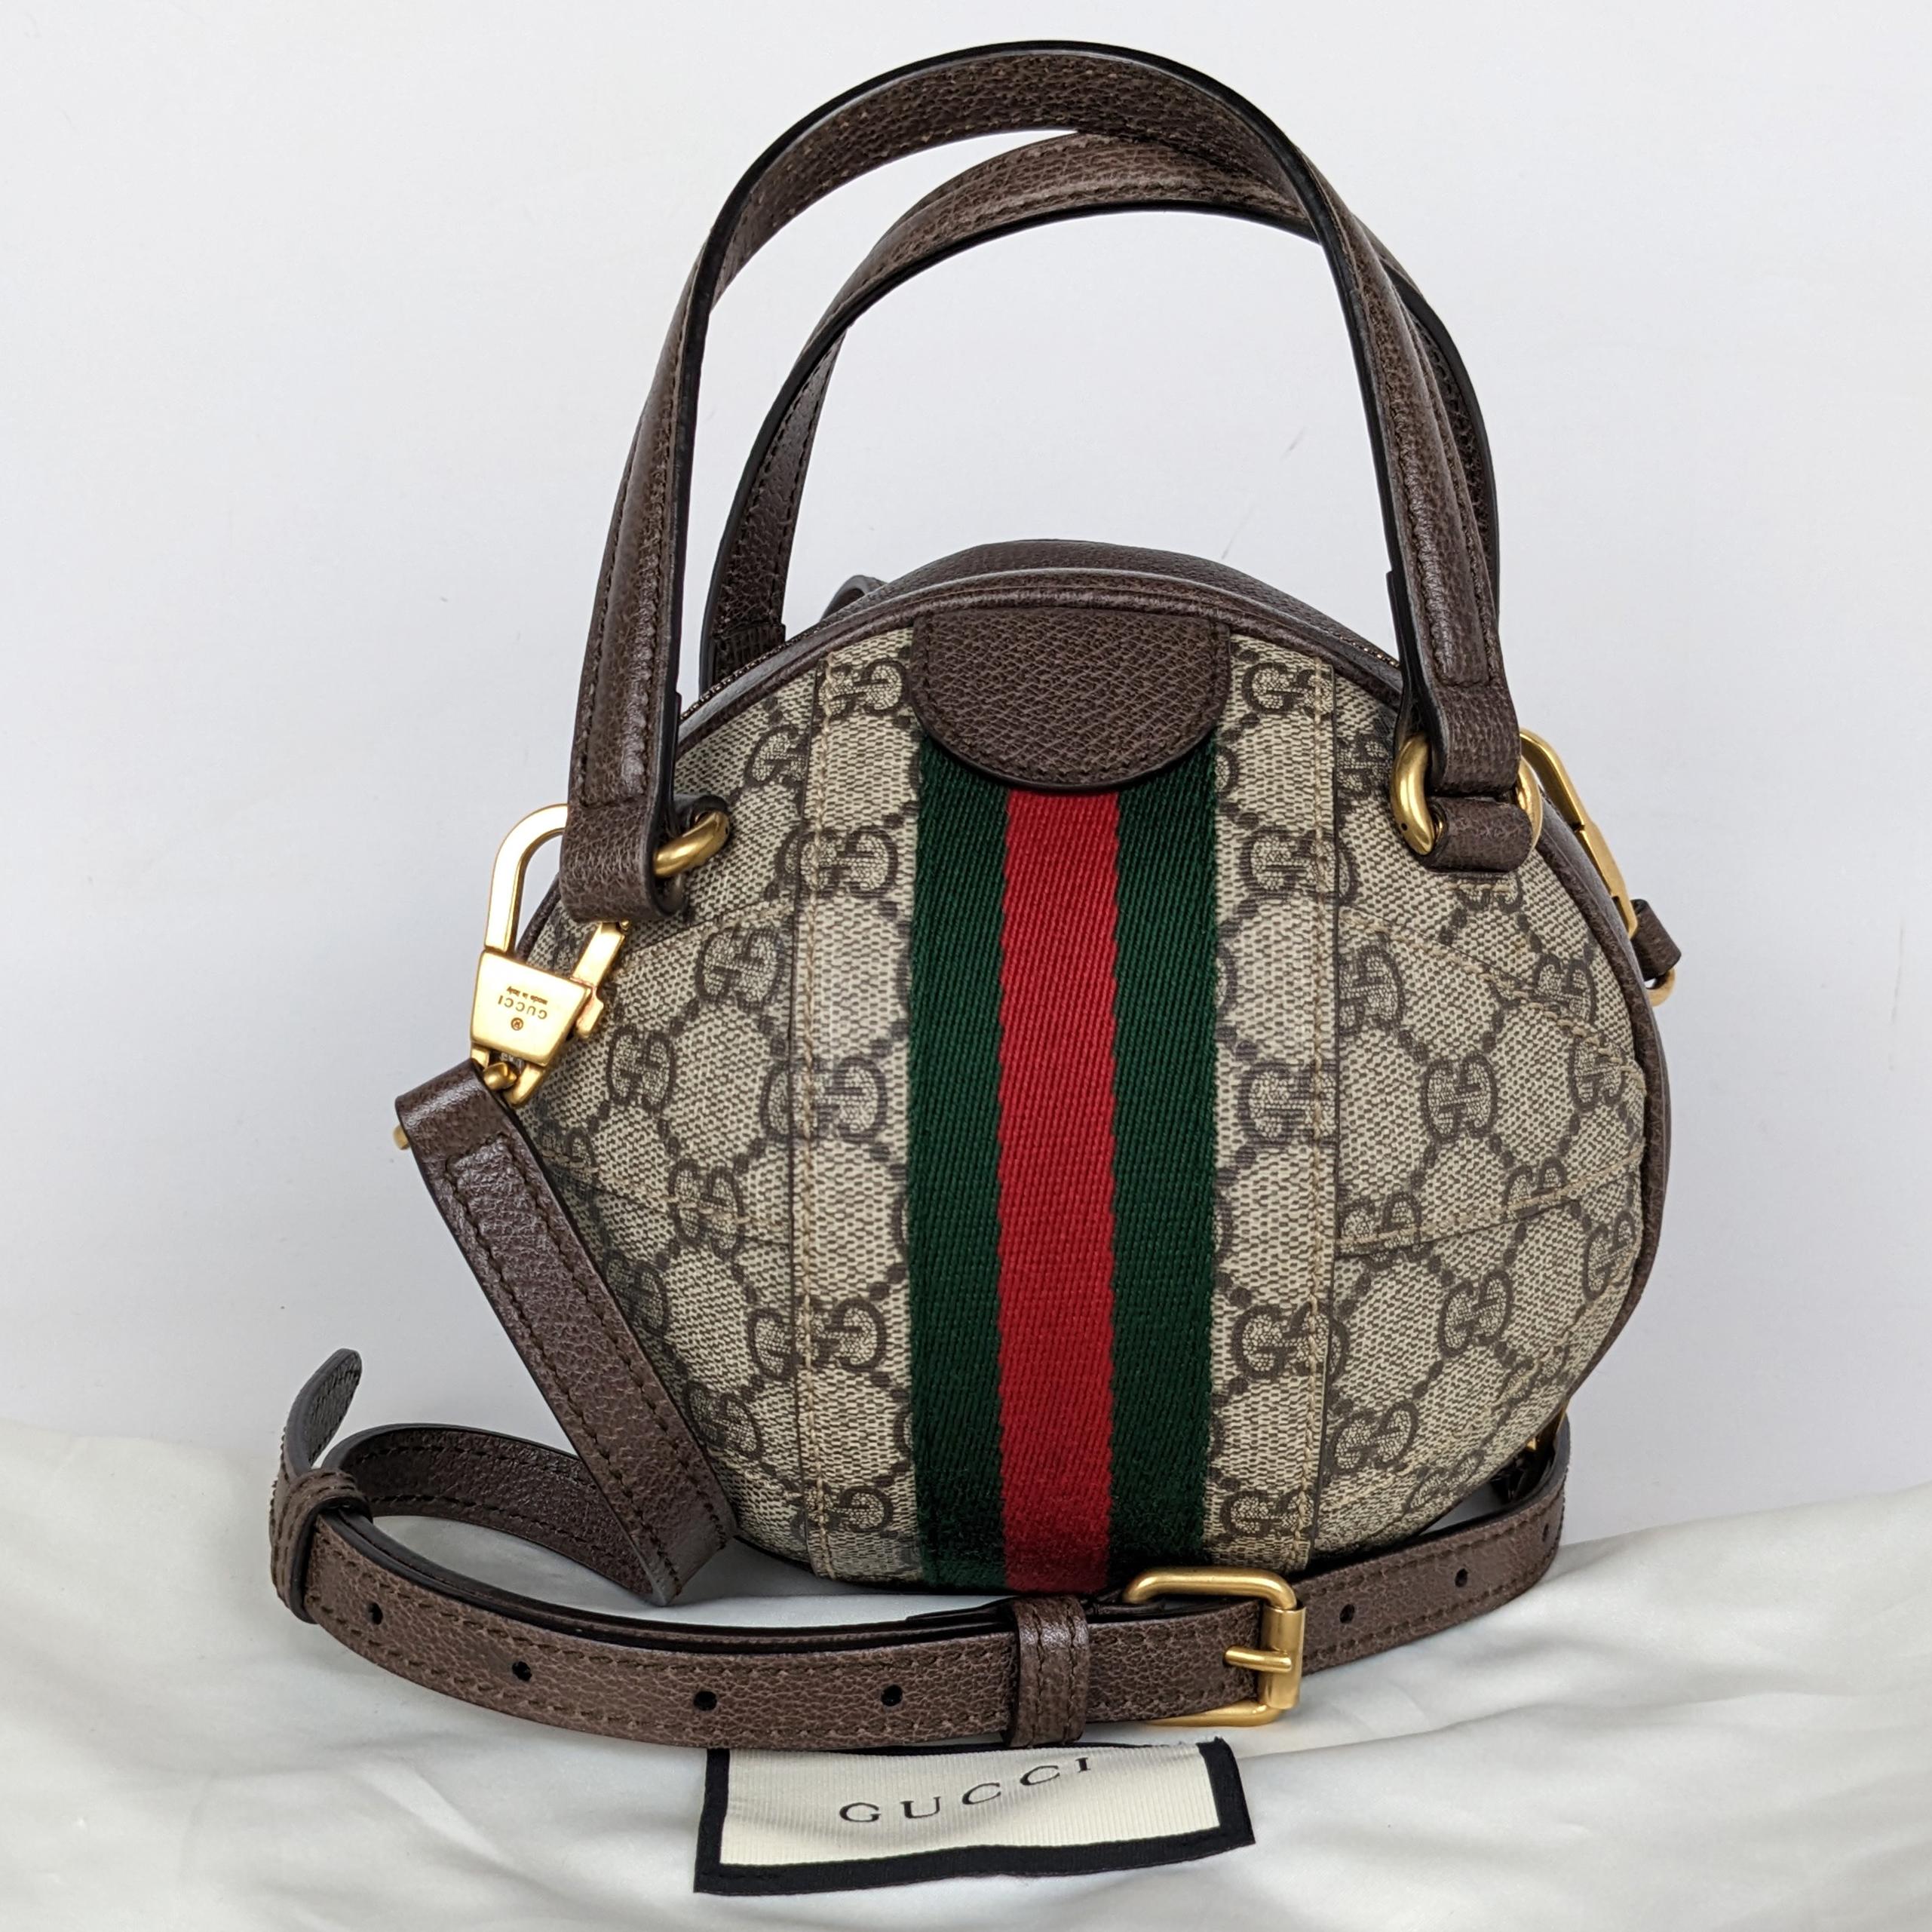 
Condition: This authentic Gucci bag is in excellent pre-loved condition. There are light scratches to the hardware and small dent on the bottom of the bag.

Includes: Dust bag, long strap

Features: Aged gold GG logo emblem on the front and an